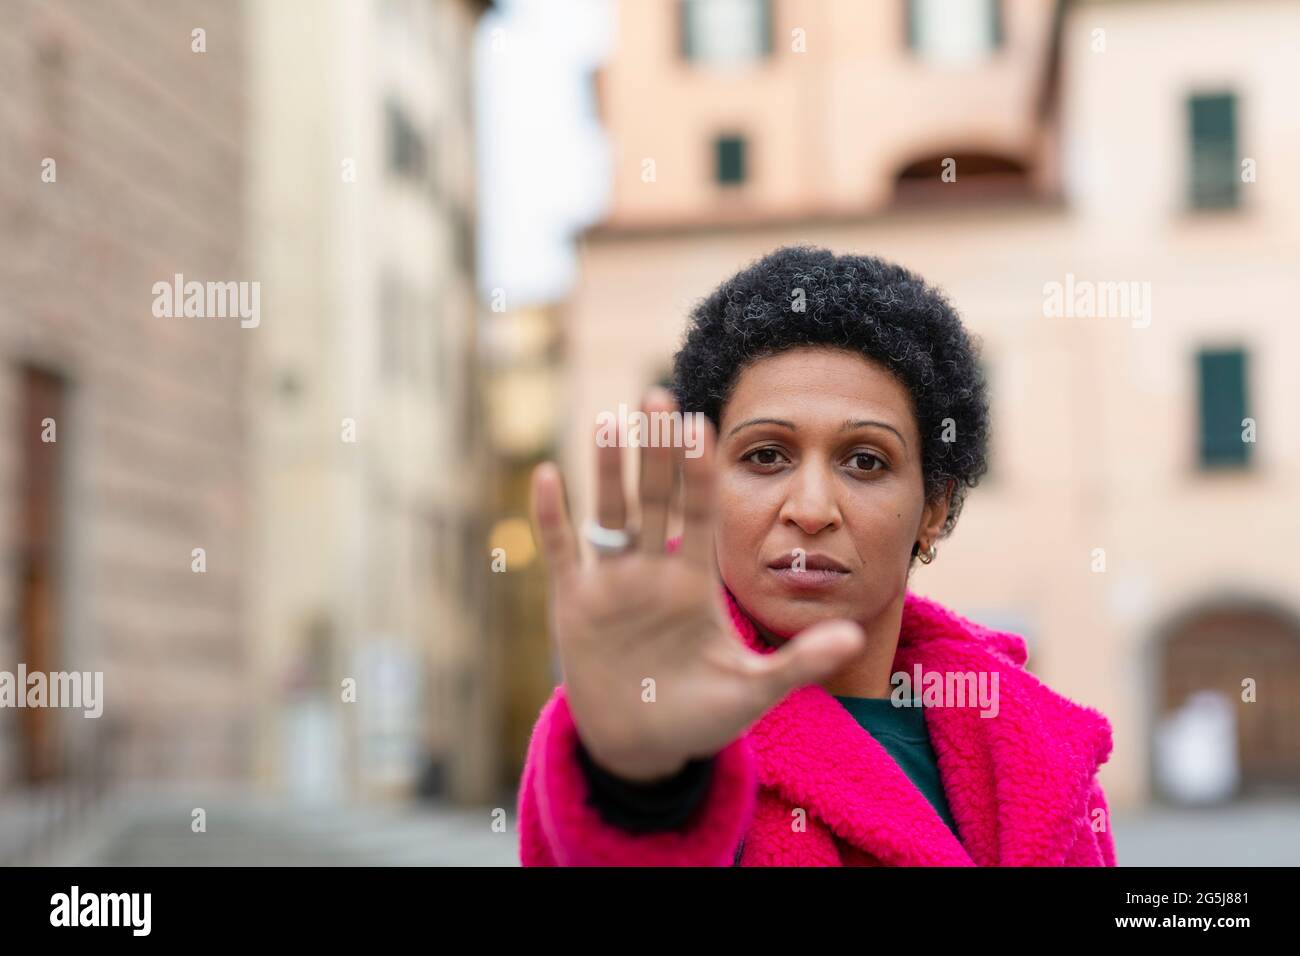 Italy, Tuscany, Pistoia, Woman making stop gesture Stock Photo